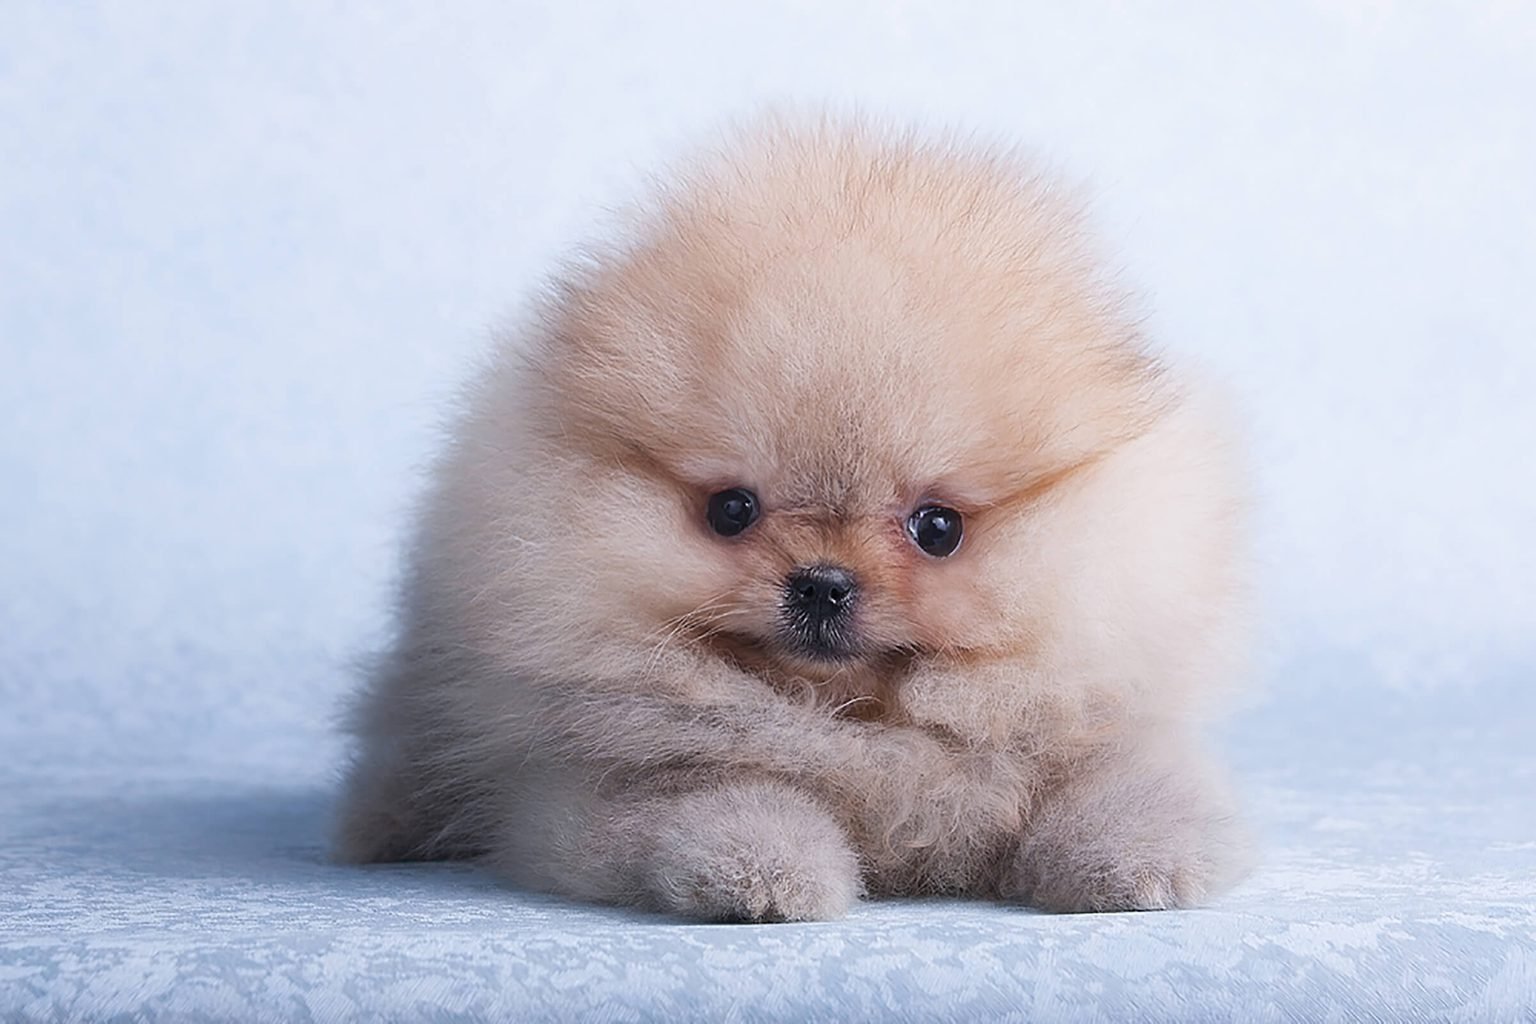 Can You Pass This General Knowledge Quiz While Being Distracted by Cute Puppies? Cute Dog Puppy 8